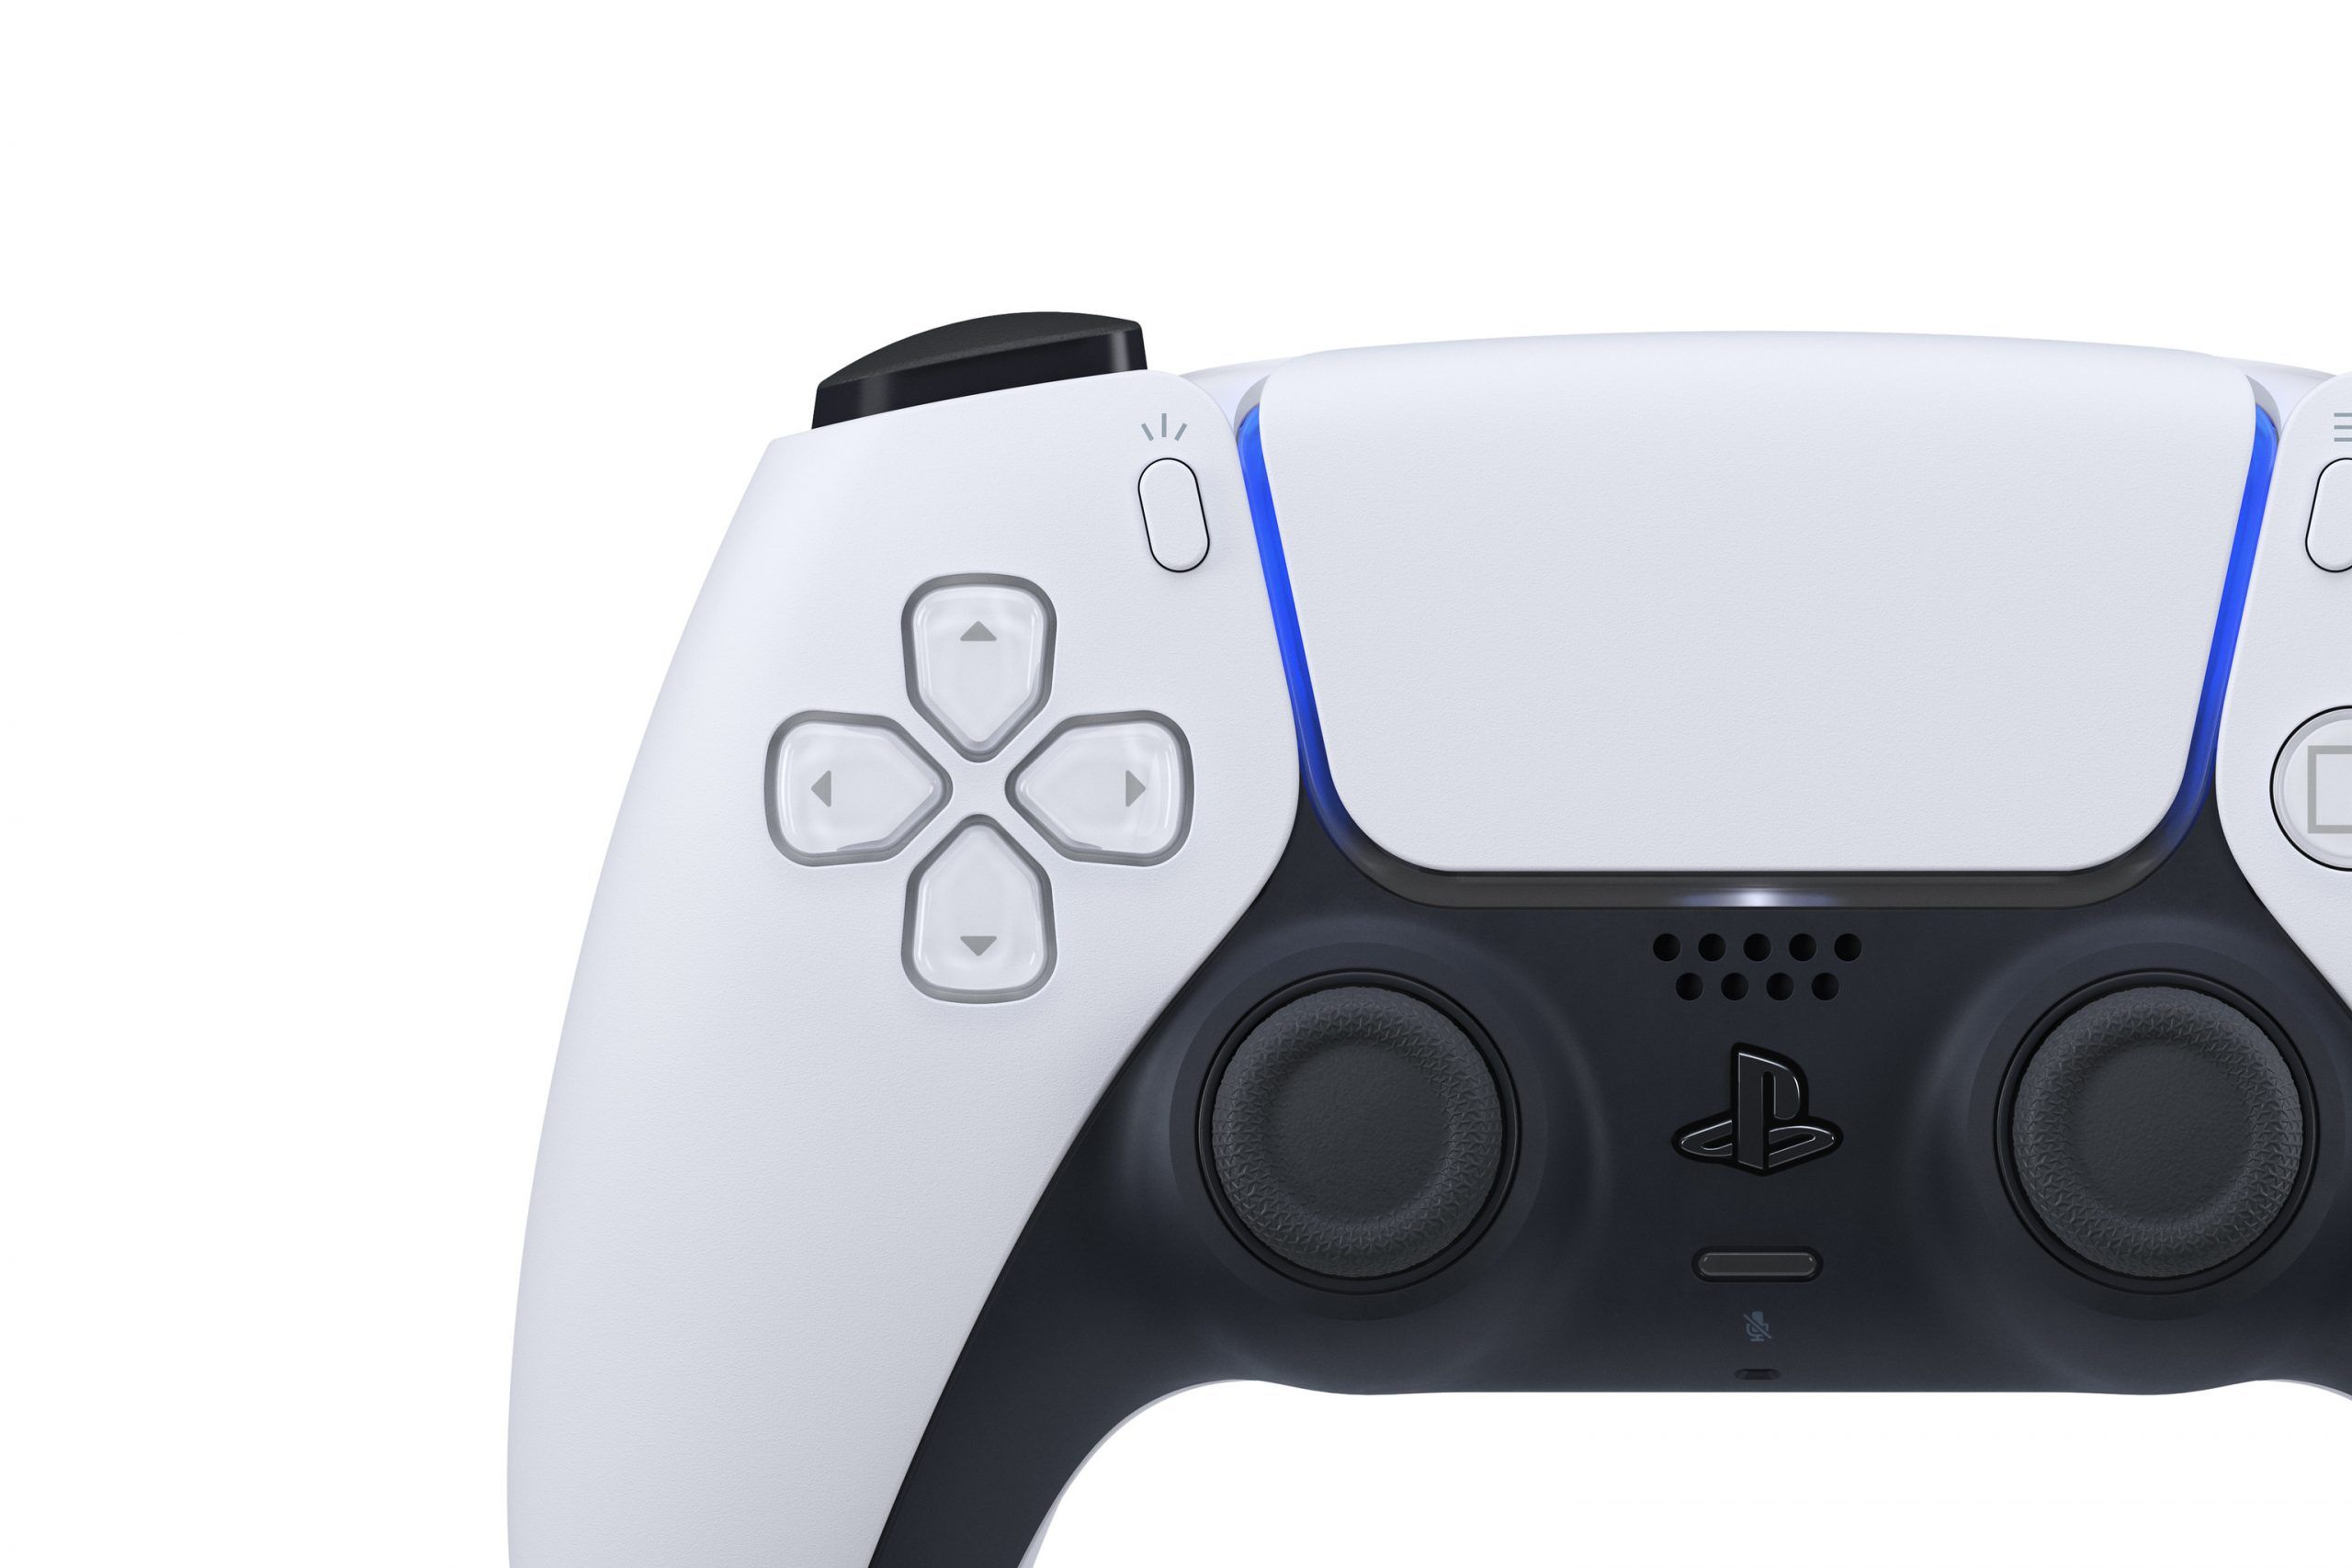 PS5 Controller Reveal: DualSense Image, Design, and More